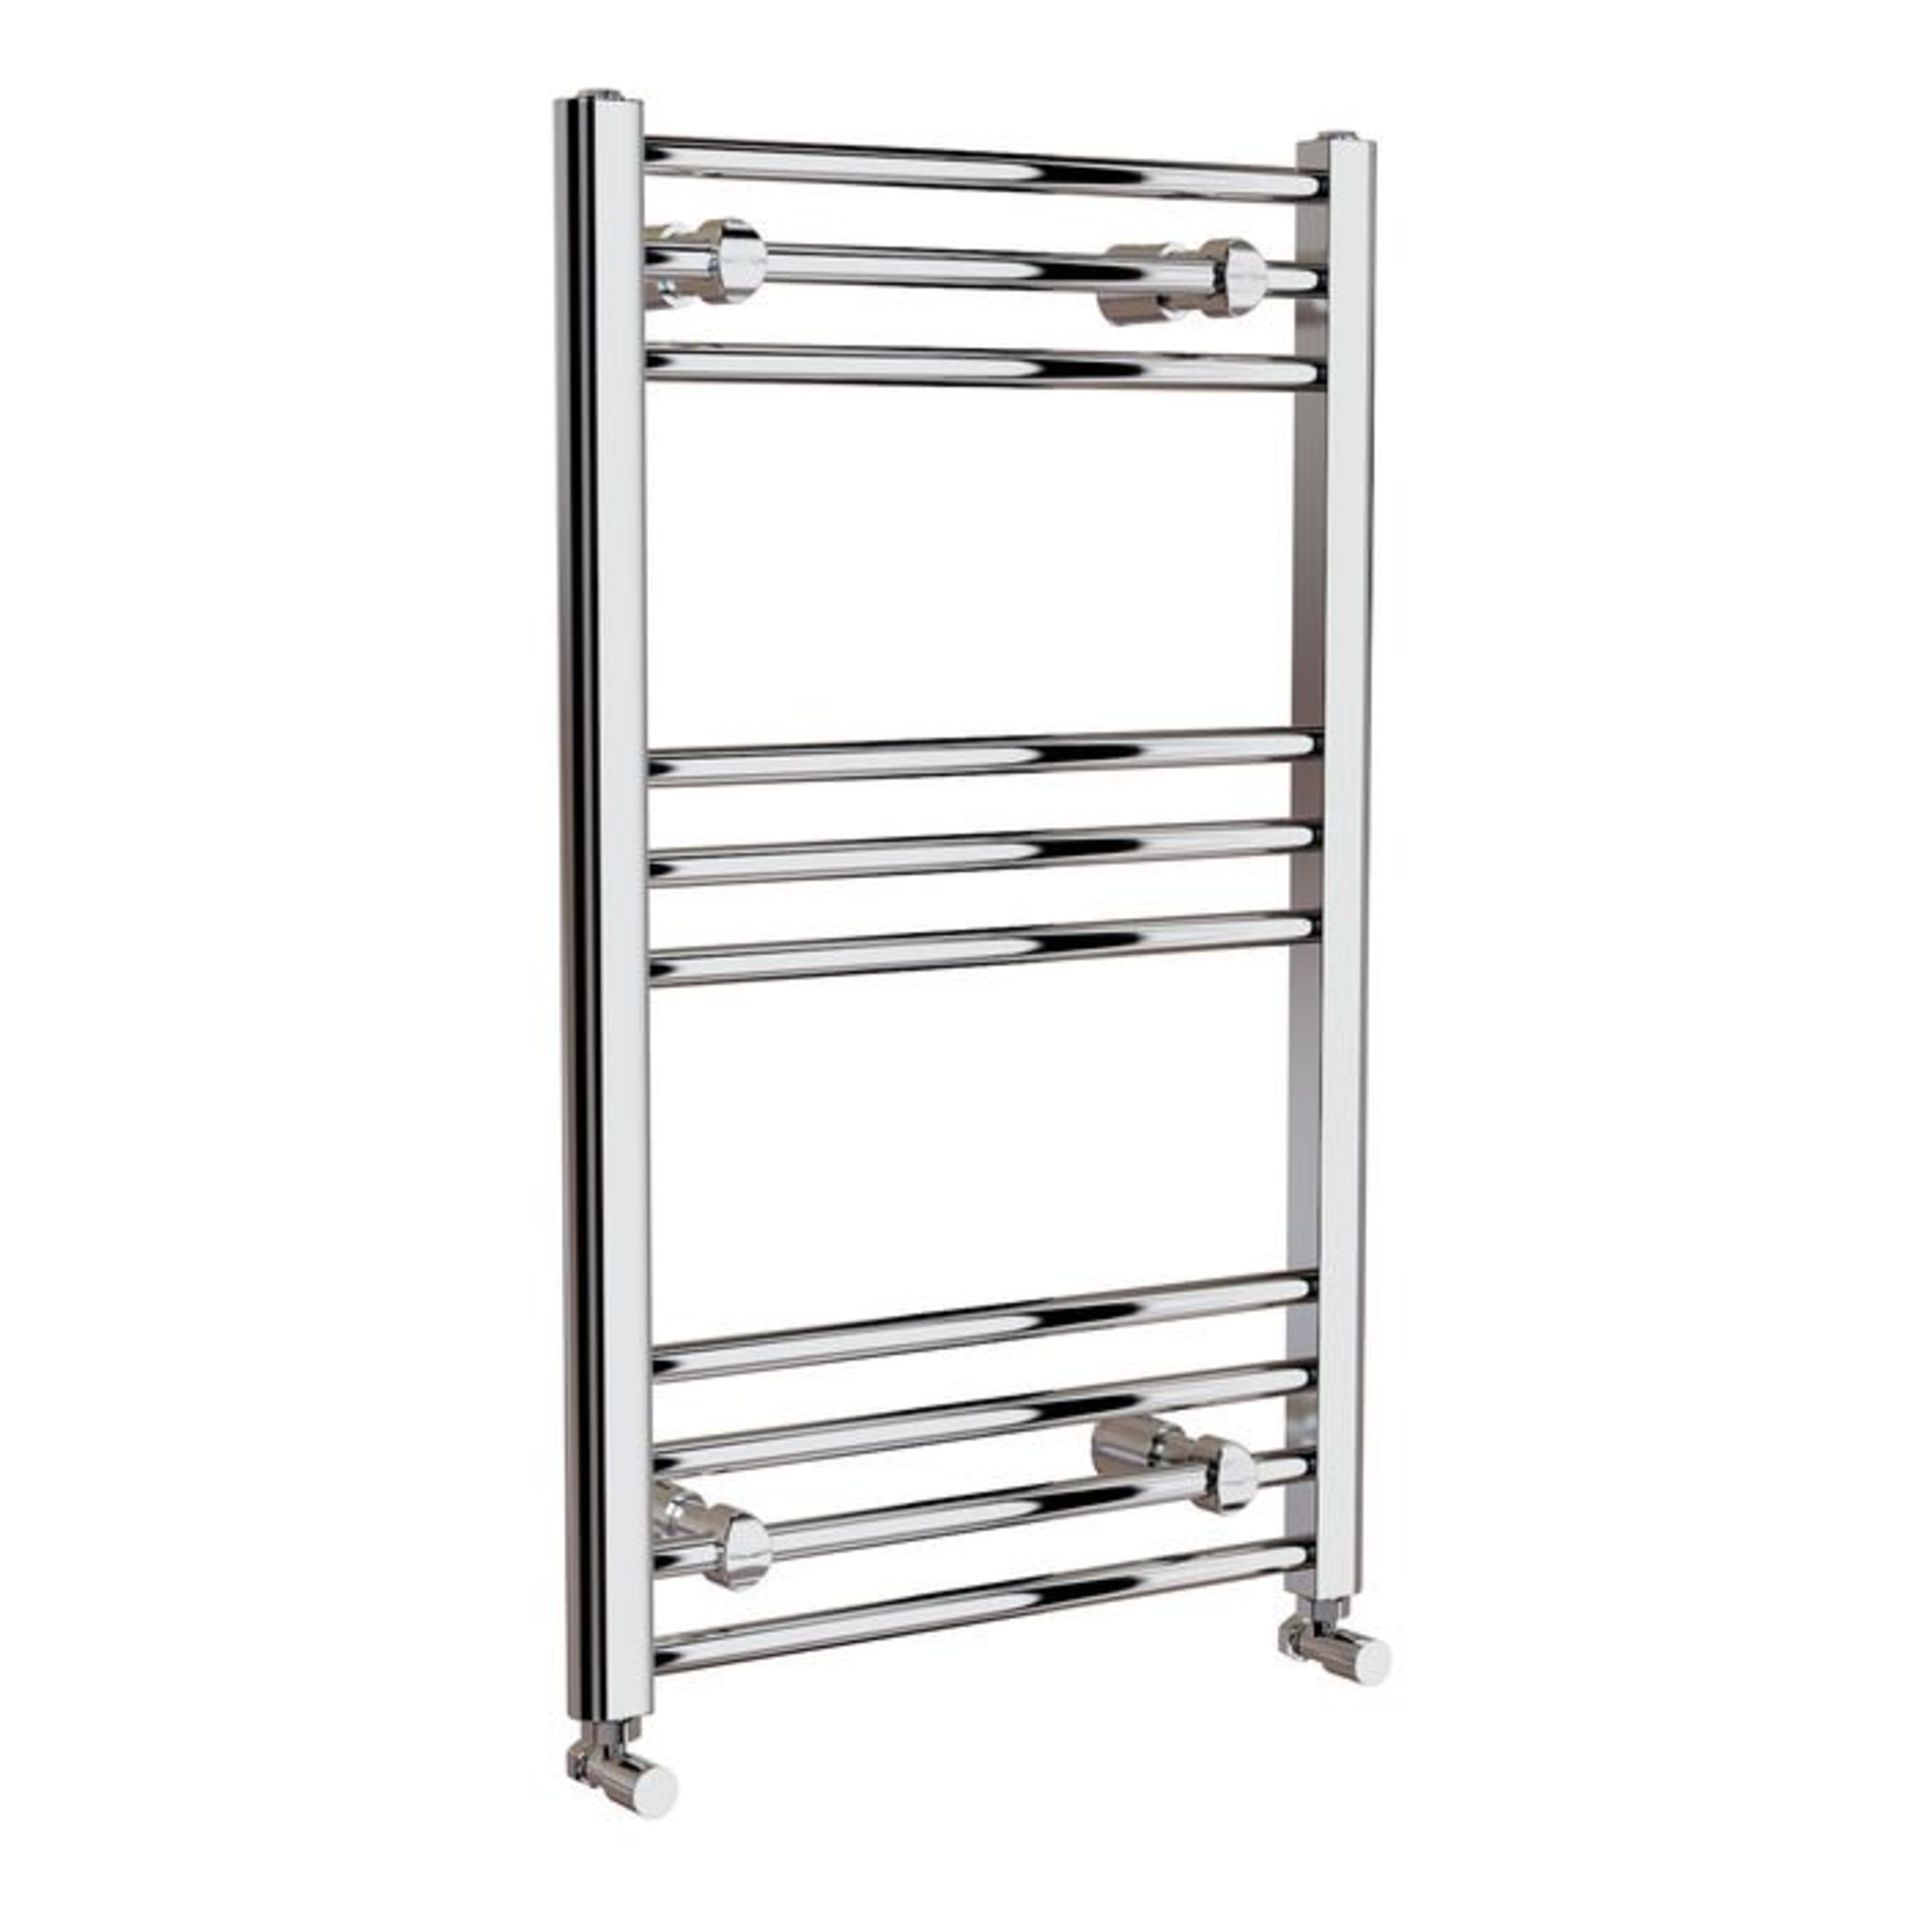 (V66) 800x500mm - 20mm Tubes - Chrome Heated Straight Rail Ladder Towel Radiator Low carbon steel - Image 3 of 3